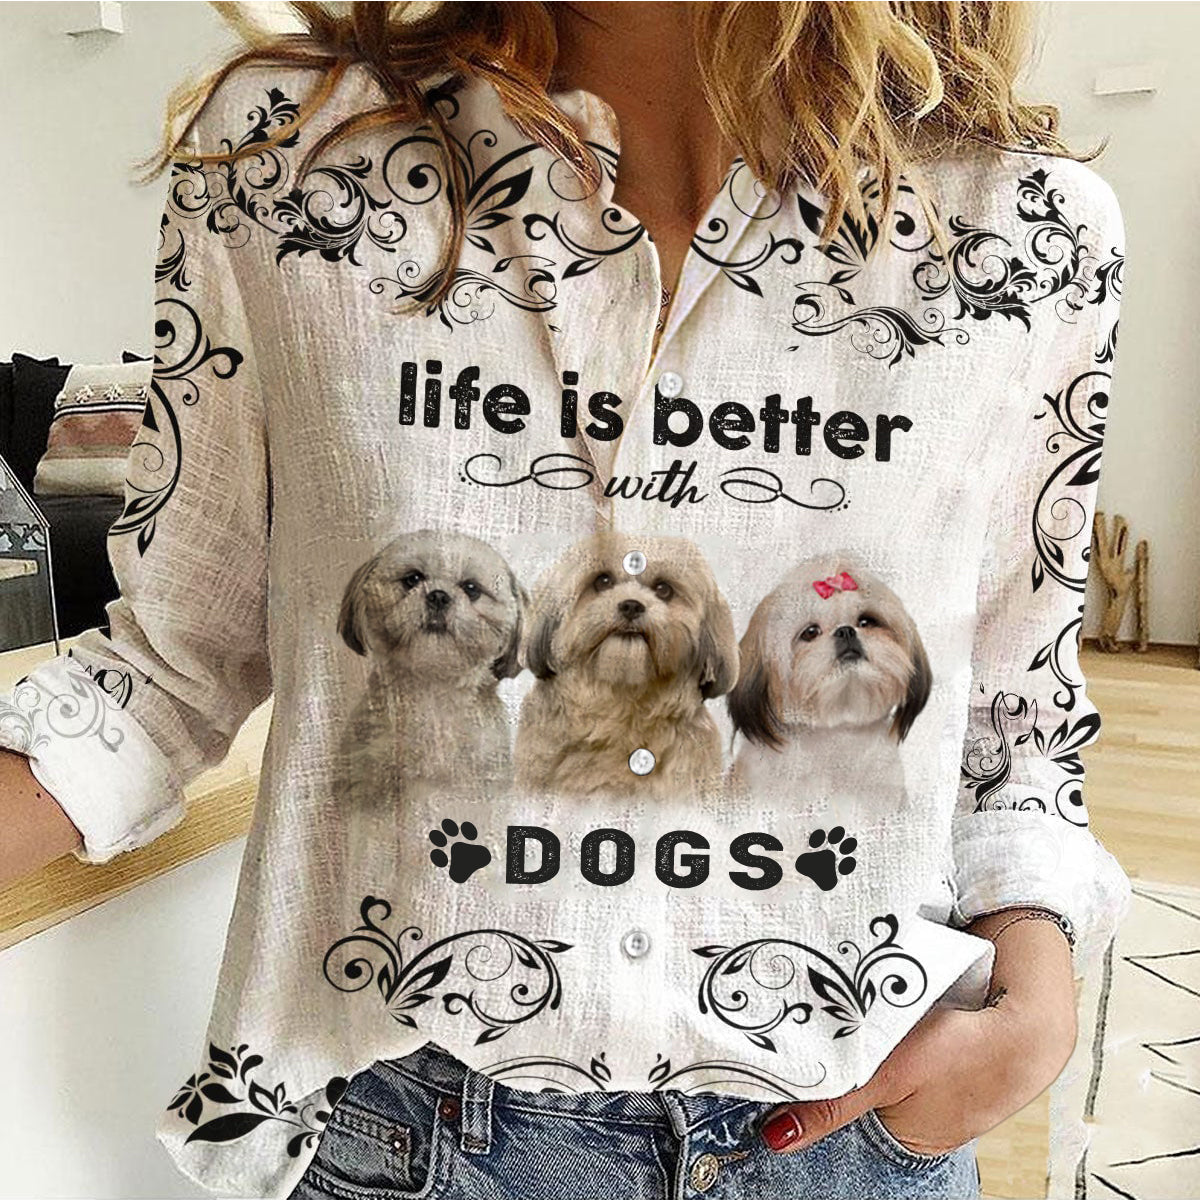 Shih Tzu - Life Is Better With Dogs Women's Long-Sleeve Shirt